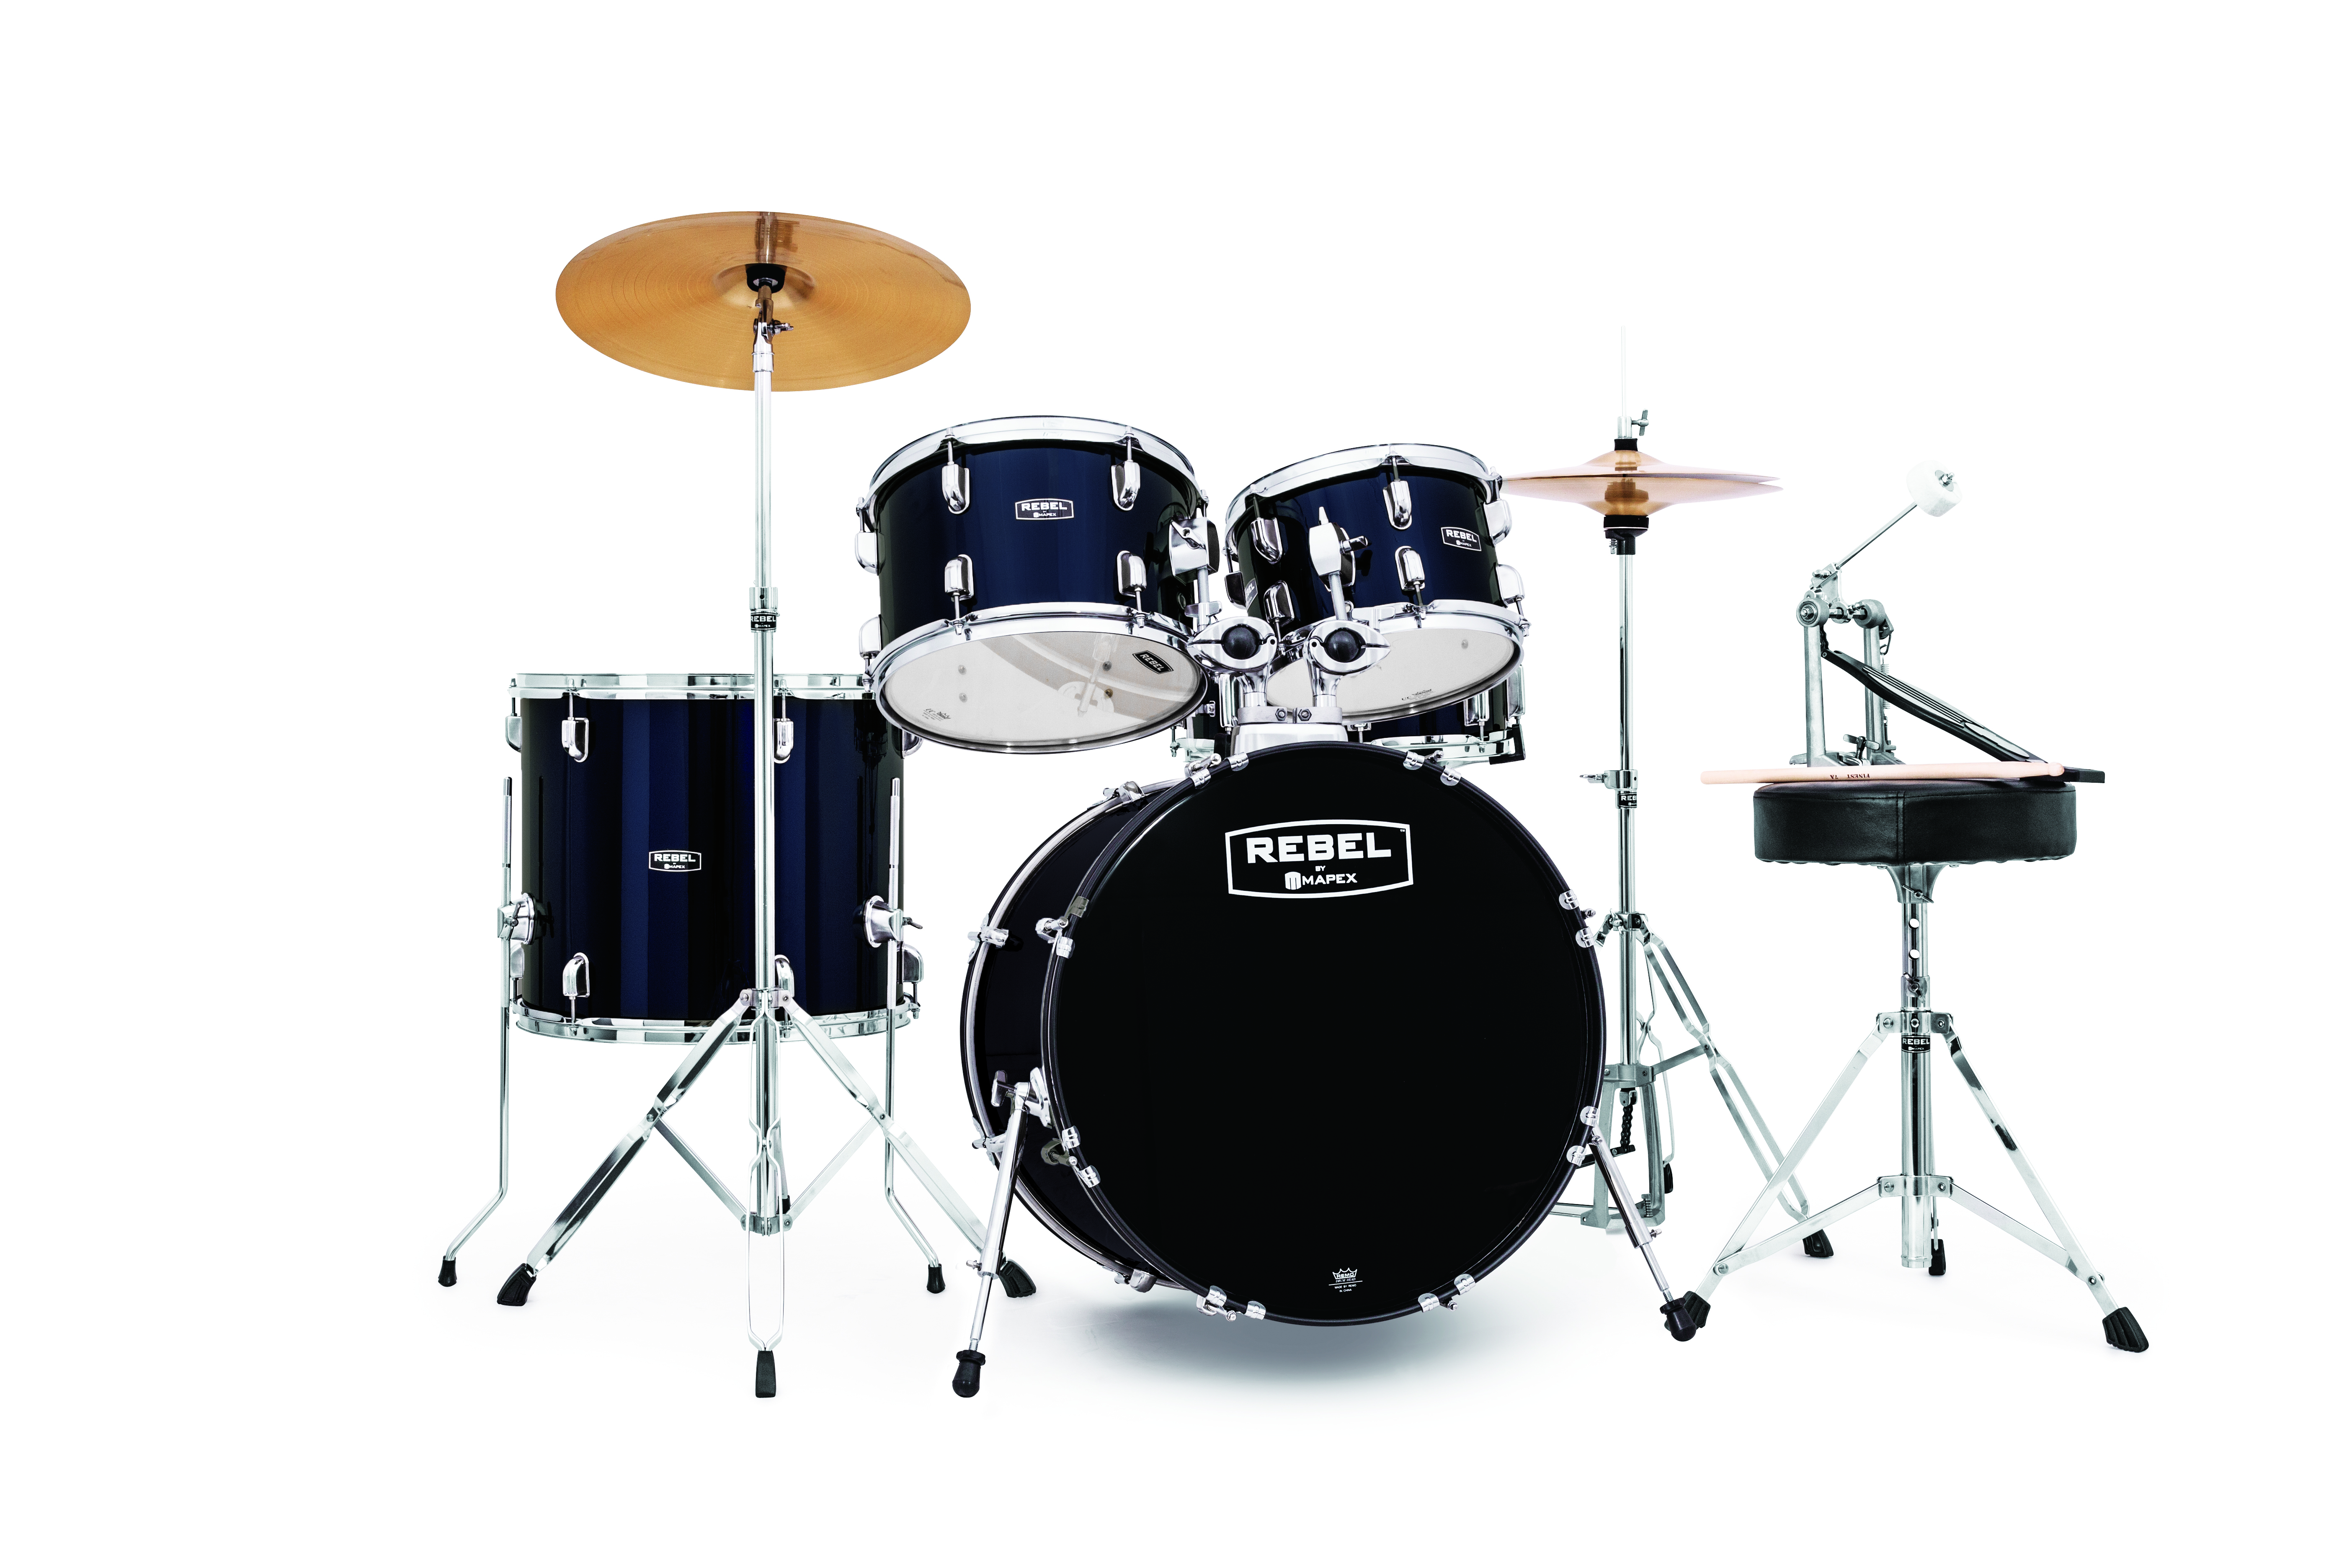 Mapex Rebel 5-piece Complete Jazz Set Up with Fast Size Toms - RB5044FTCYB - Royal Blue